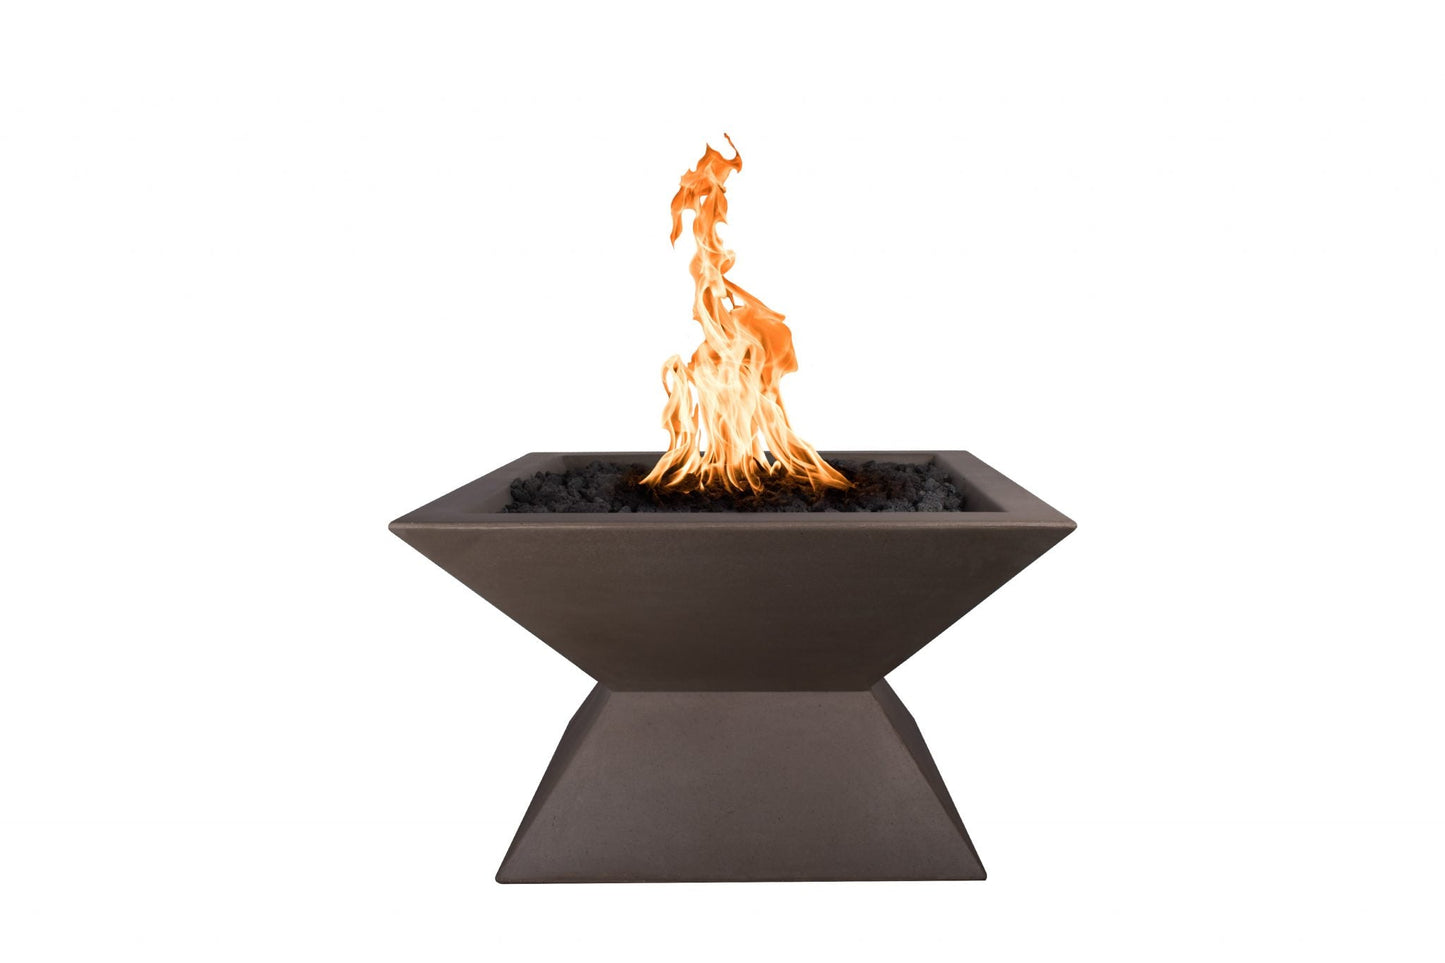 The Outdoor Plus Square Uxmal 30" Hammered Copper Natural Gas Fire Pit with 110V Electronic Ignition